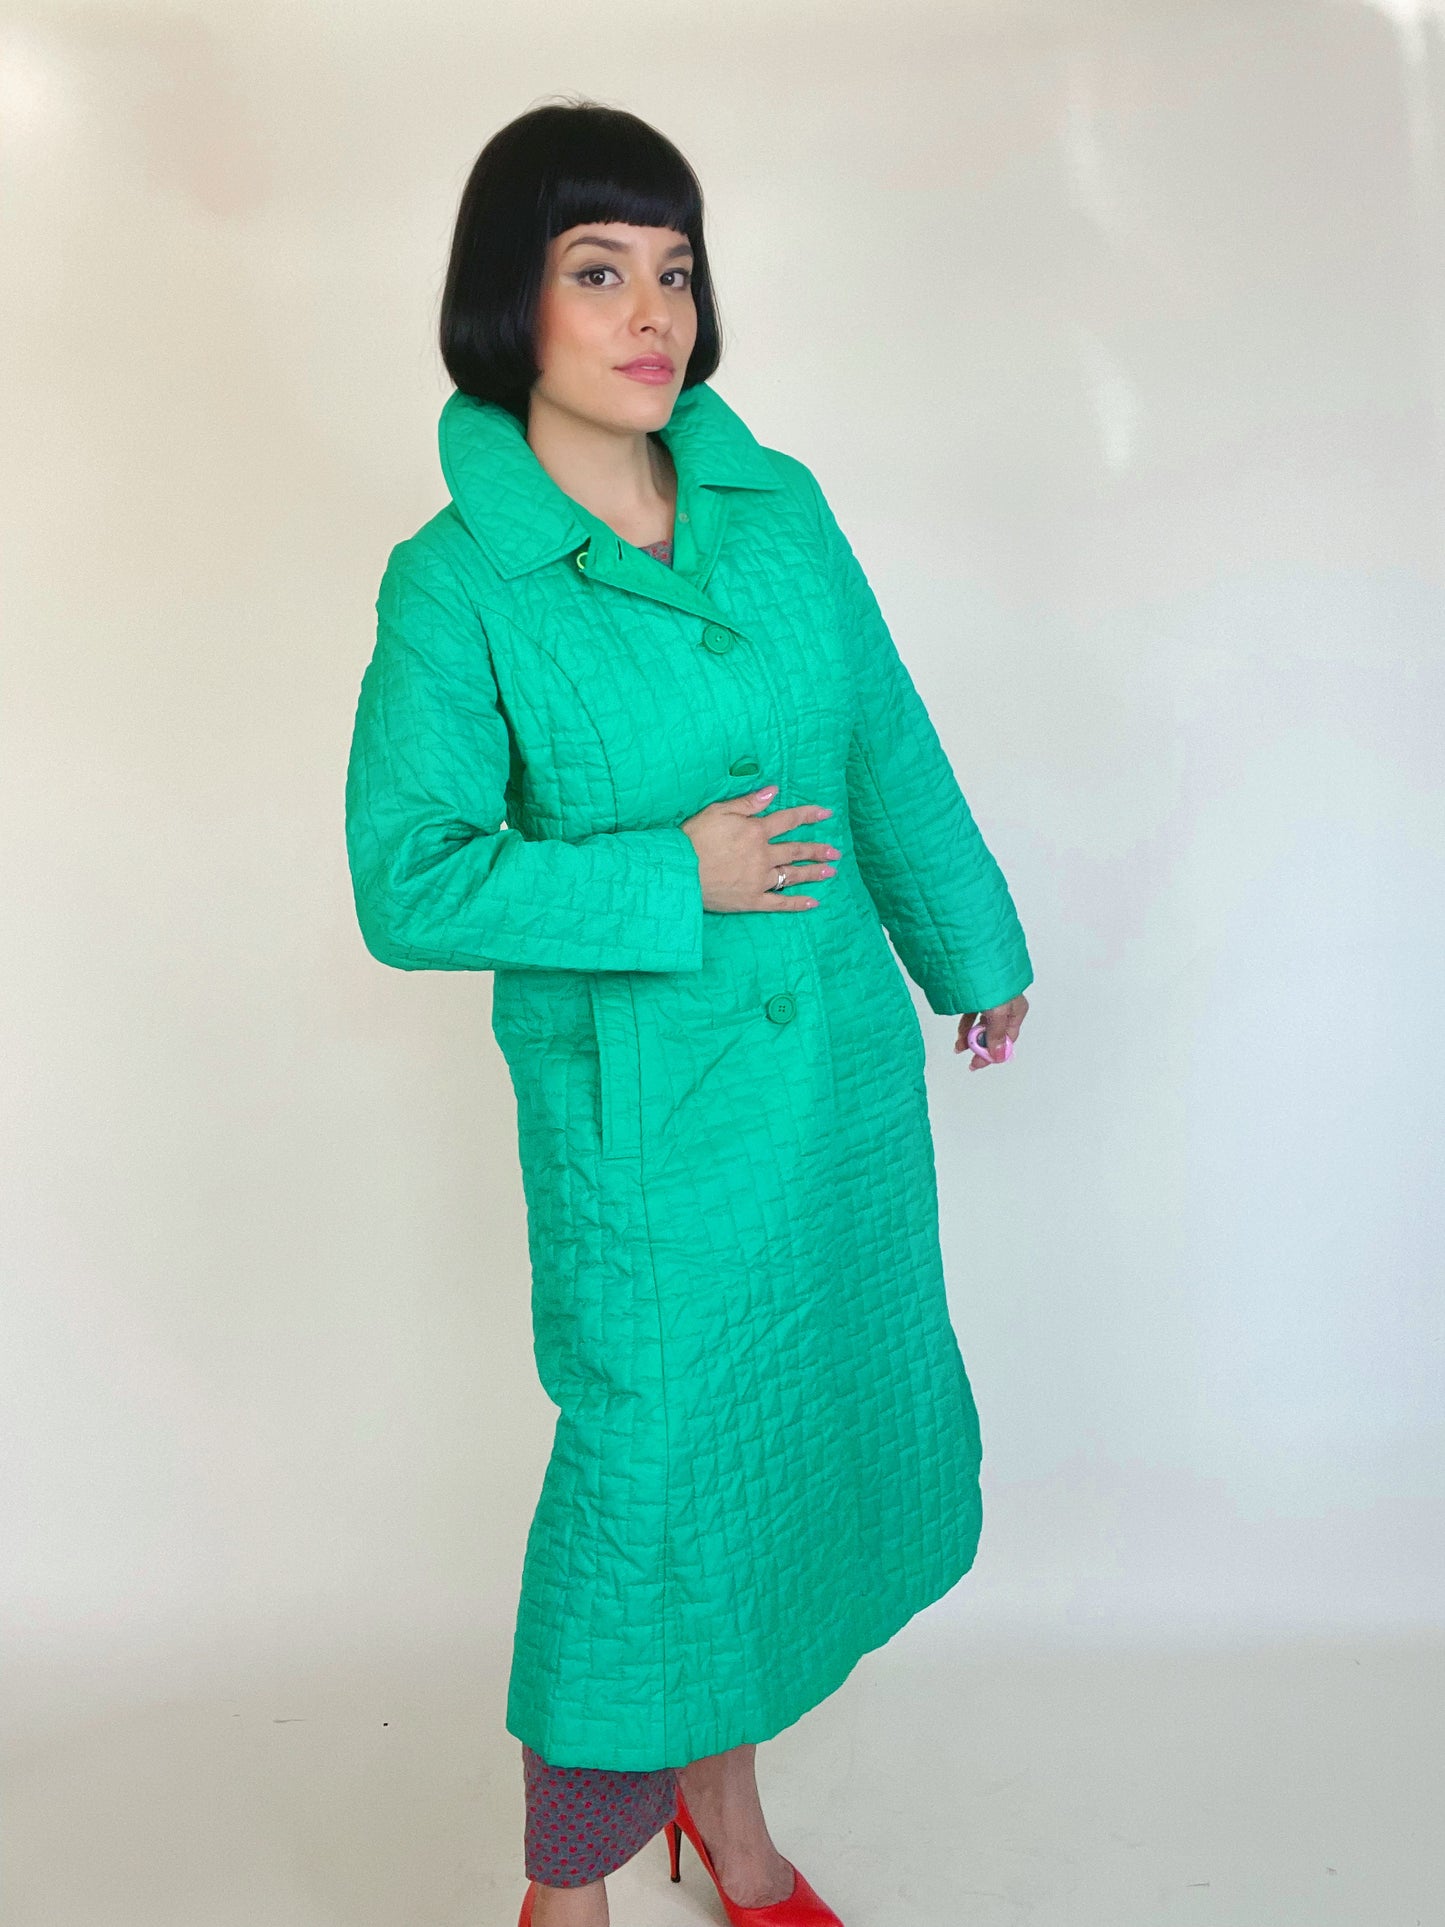 Vintage 60s / 70s Green Quilted Duster Coat Fits Sizes S-L